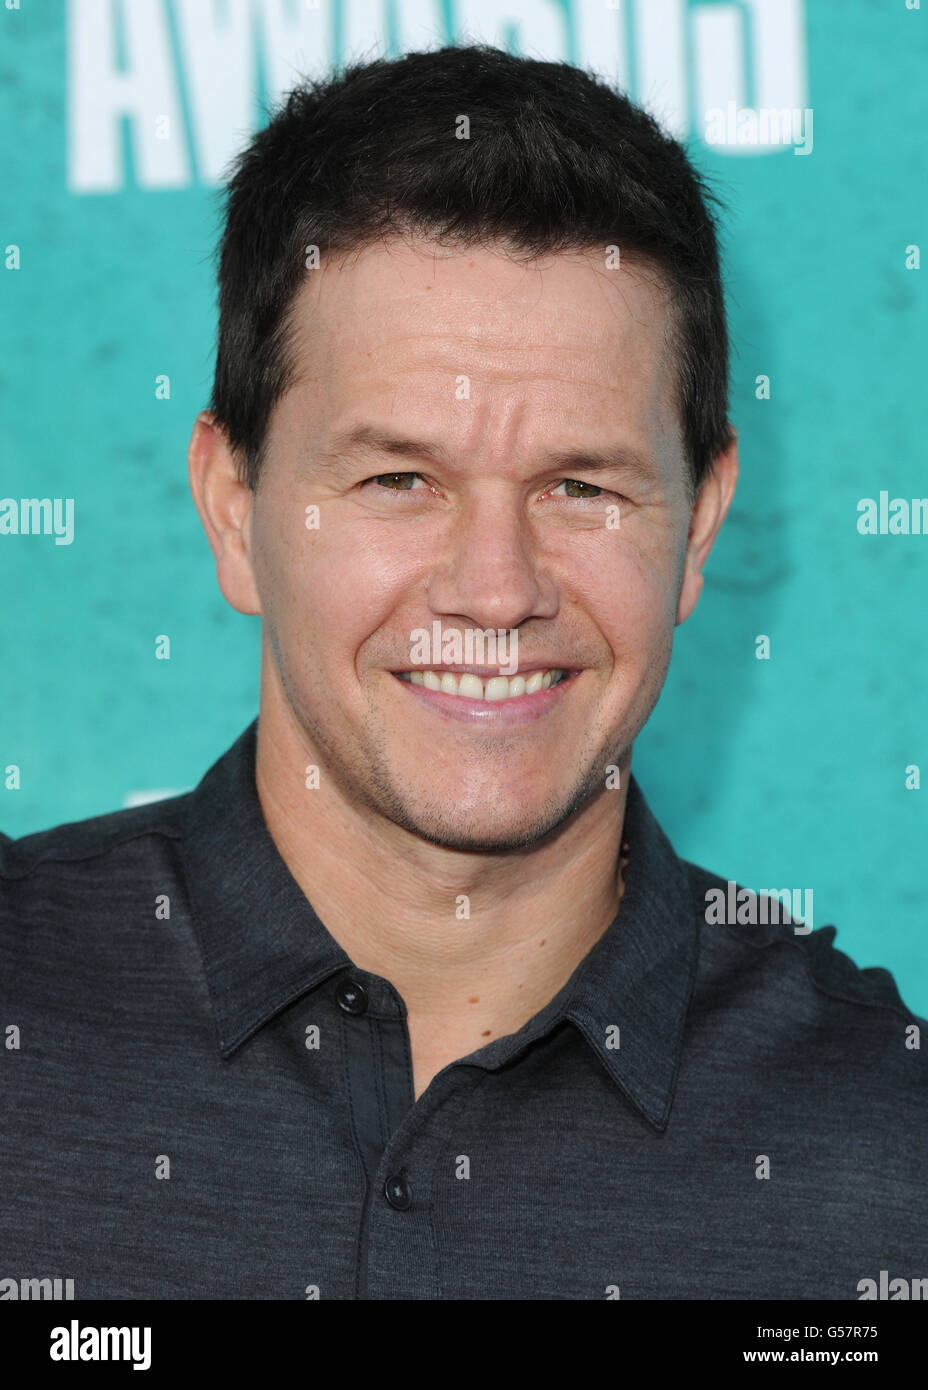 Mark Wahlberg arriving at the MTV movie awards 2012, Universal City, Los Angeles. Stock Photo